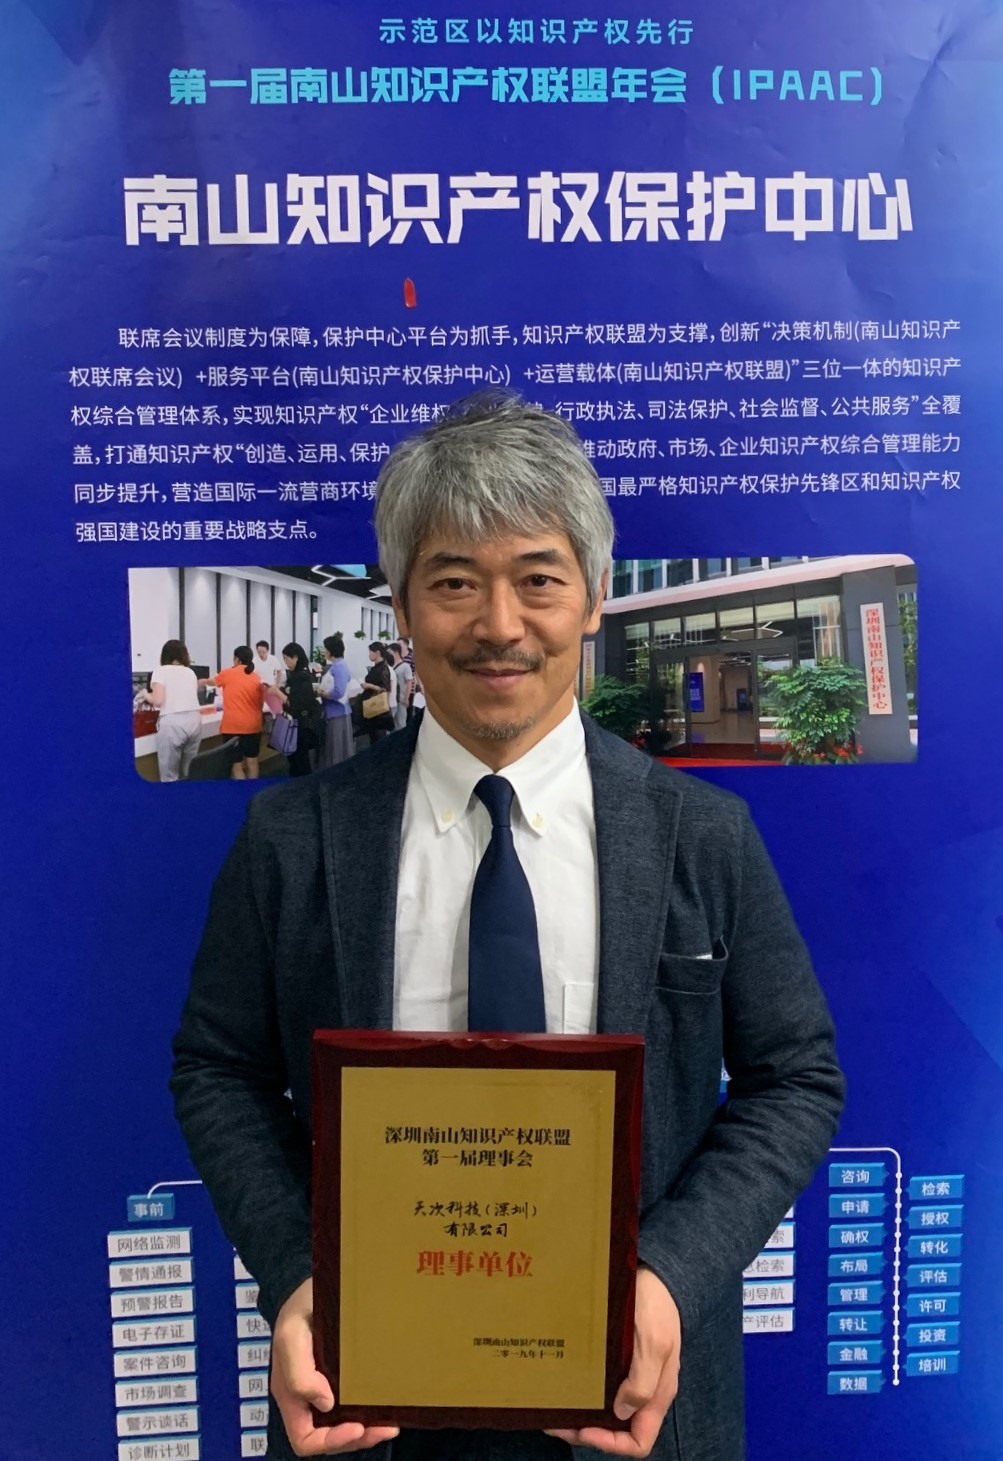 2019 Appointment of Appointment to Governing Board Knowledge Industry Rights Association of Shenzhen City 